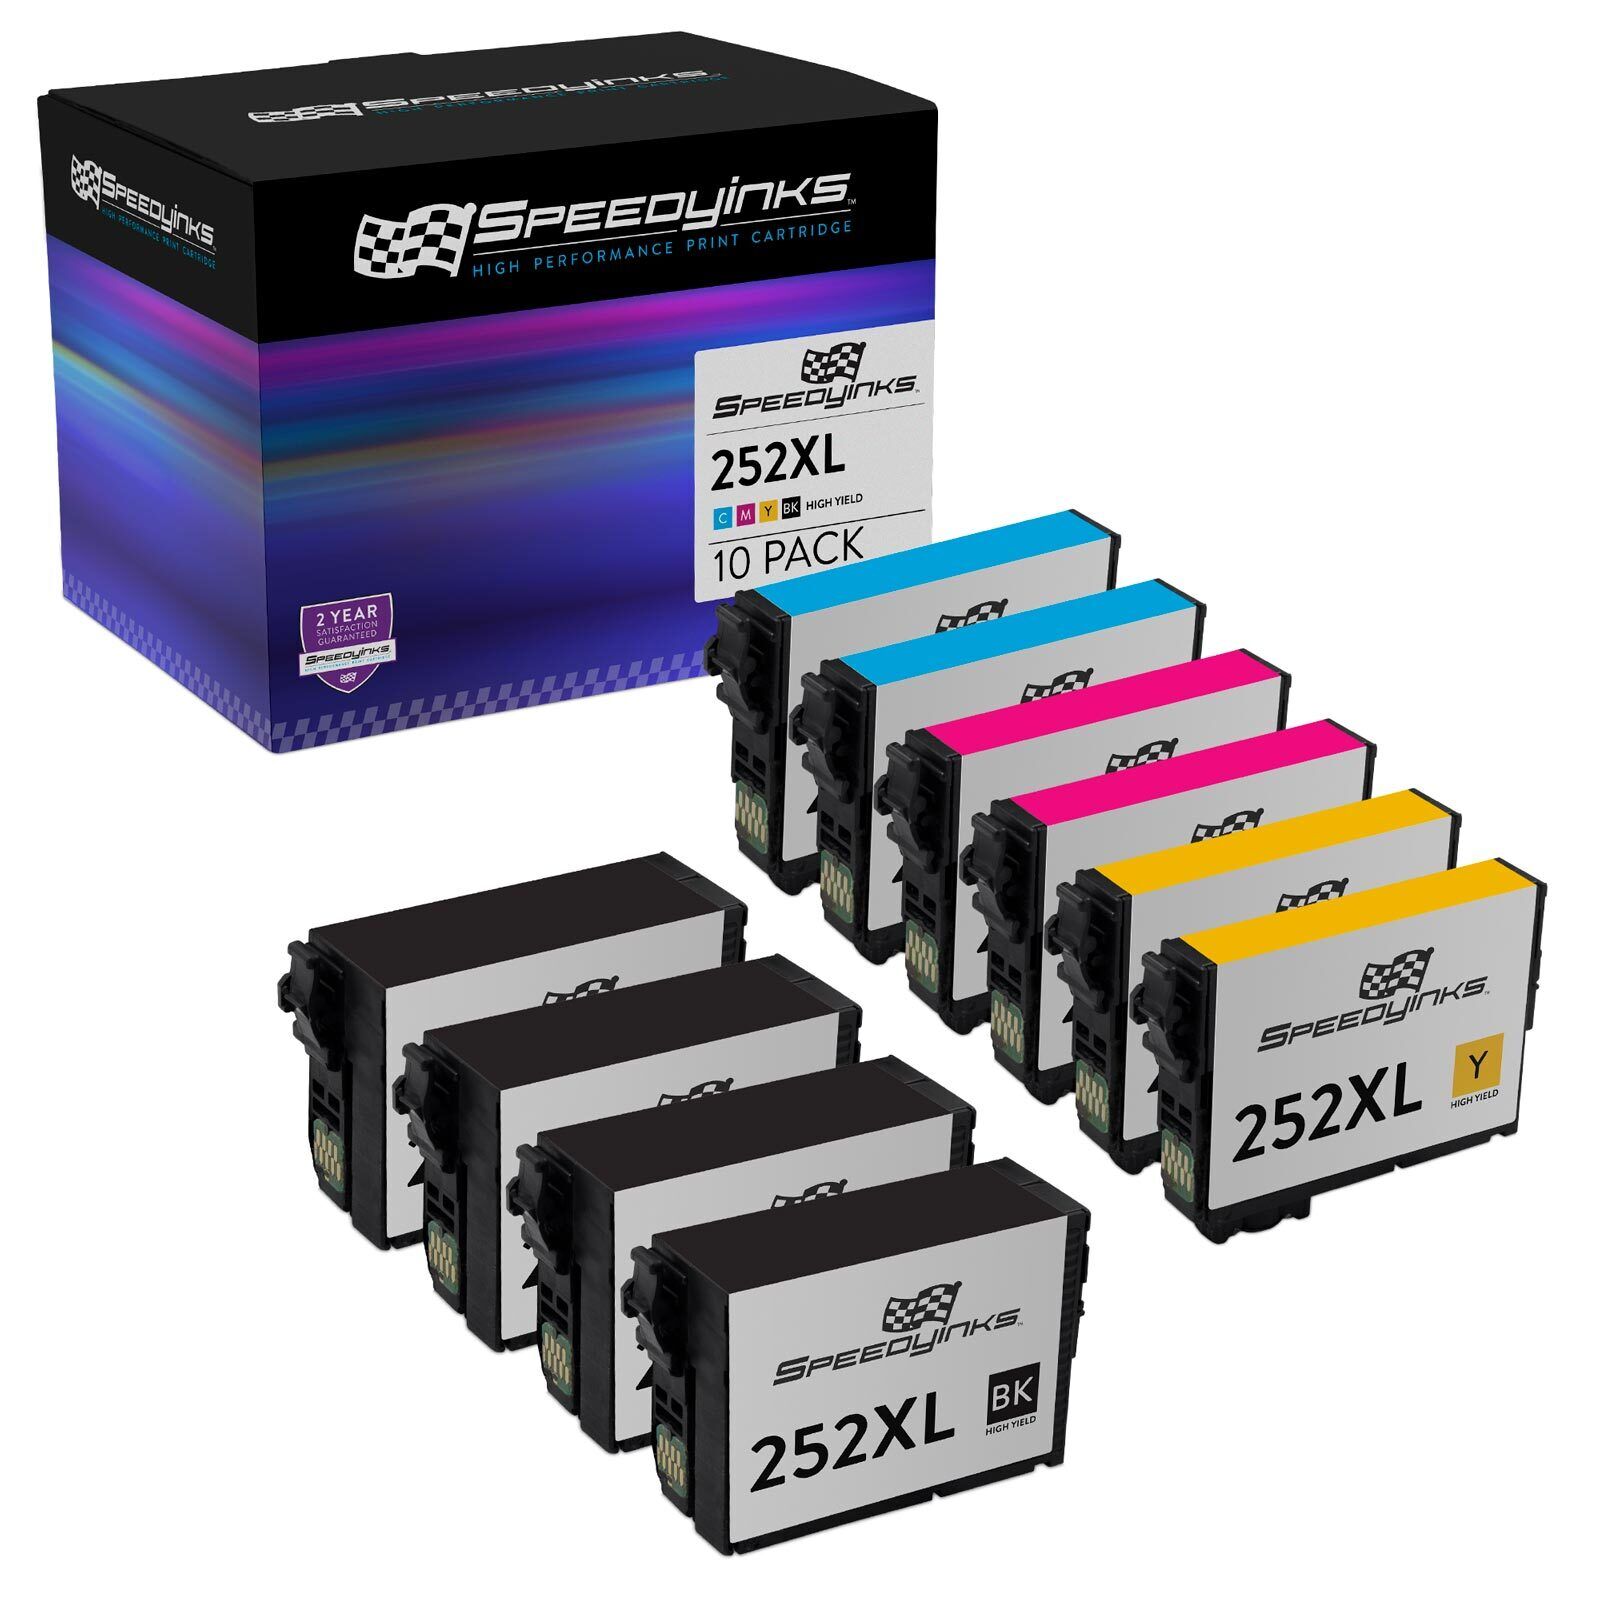 SPEEDYINKS Replacements for Epson 252XL High Capacity Ink Cartridges Combo 10pk